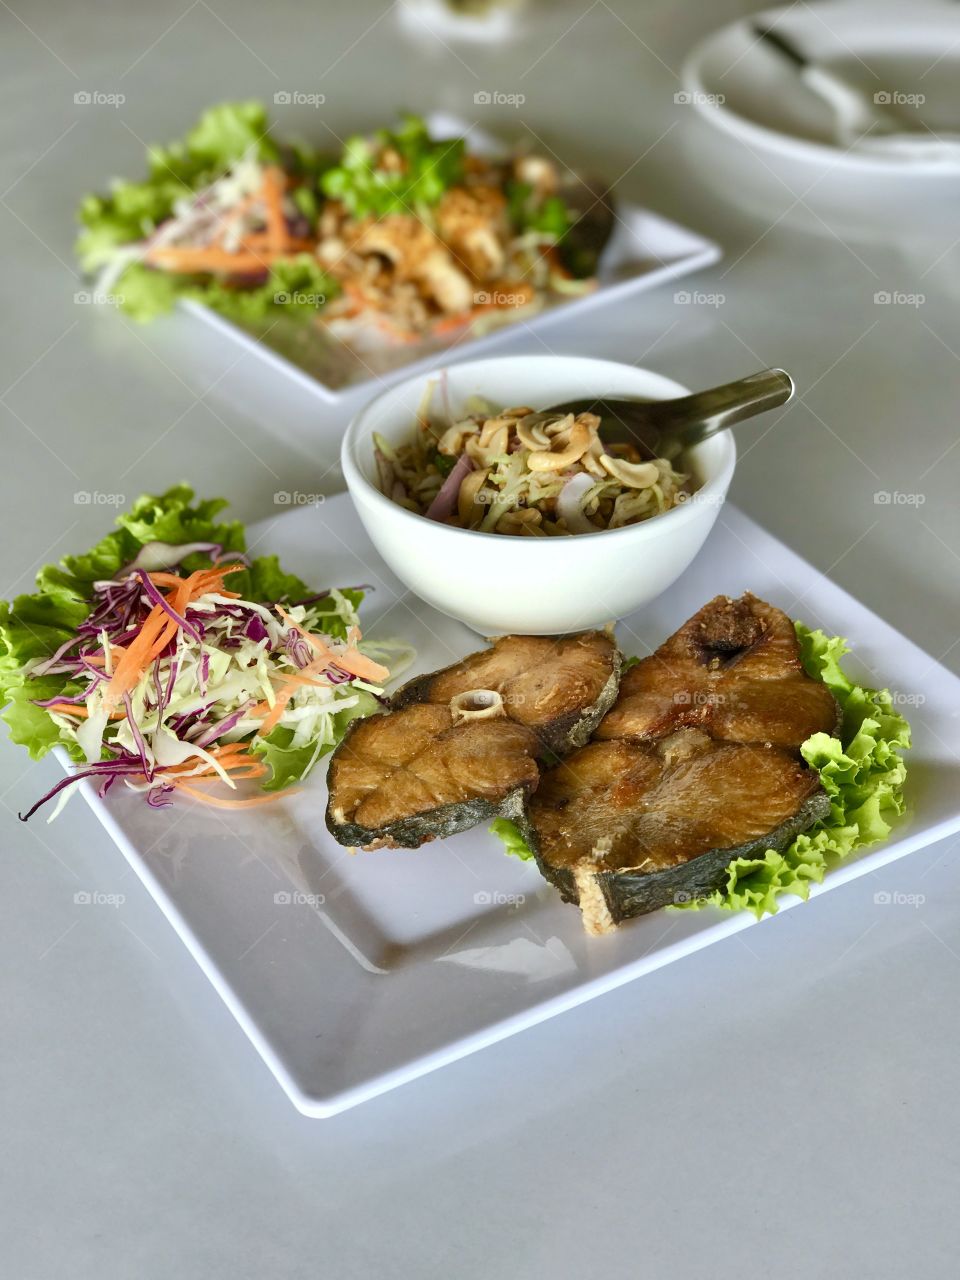 Deep fried fish with sour and spicy mango salad.